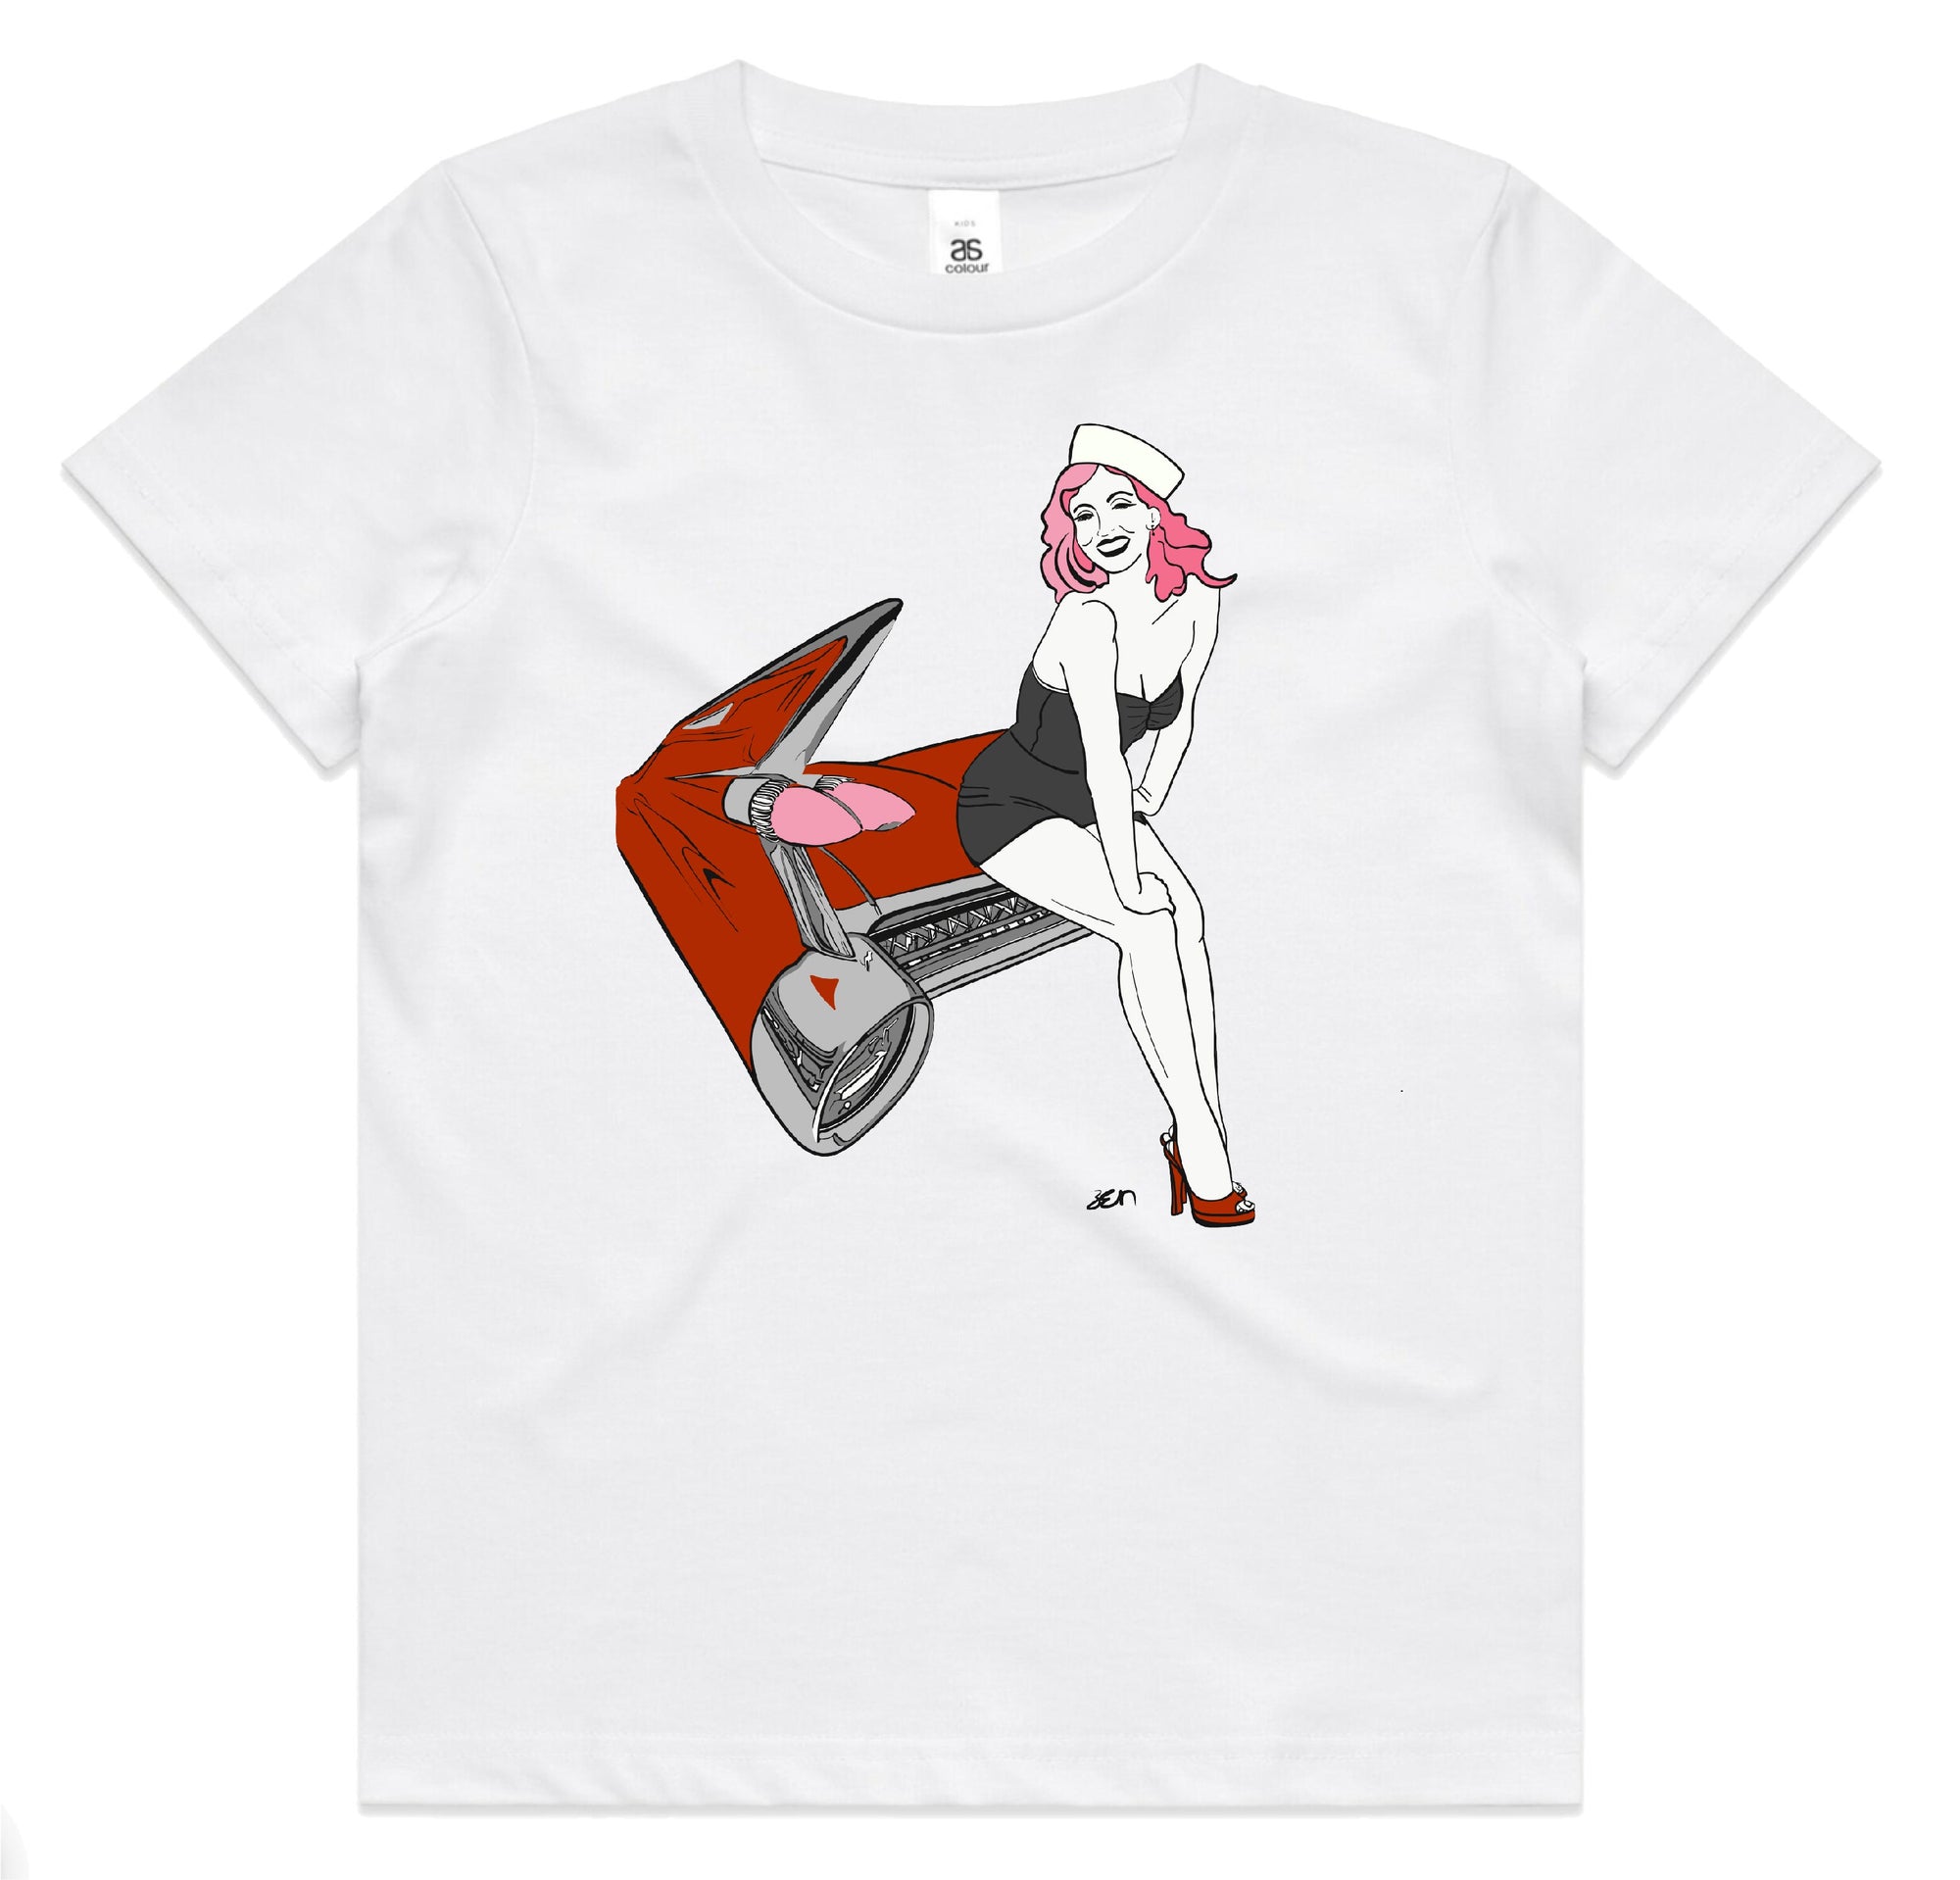 '59 FINS' BACKEND TAILLIGHTS 59 CADILLAC SAILOR GIRL KIDS TEE